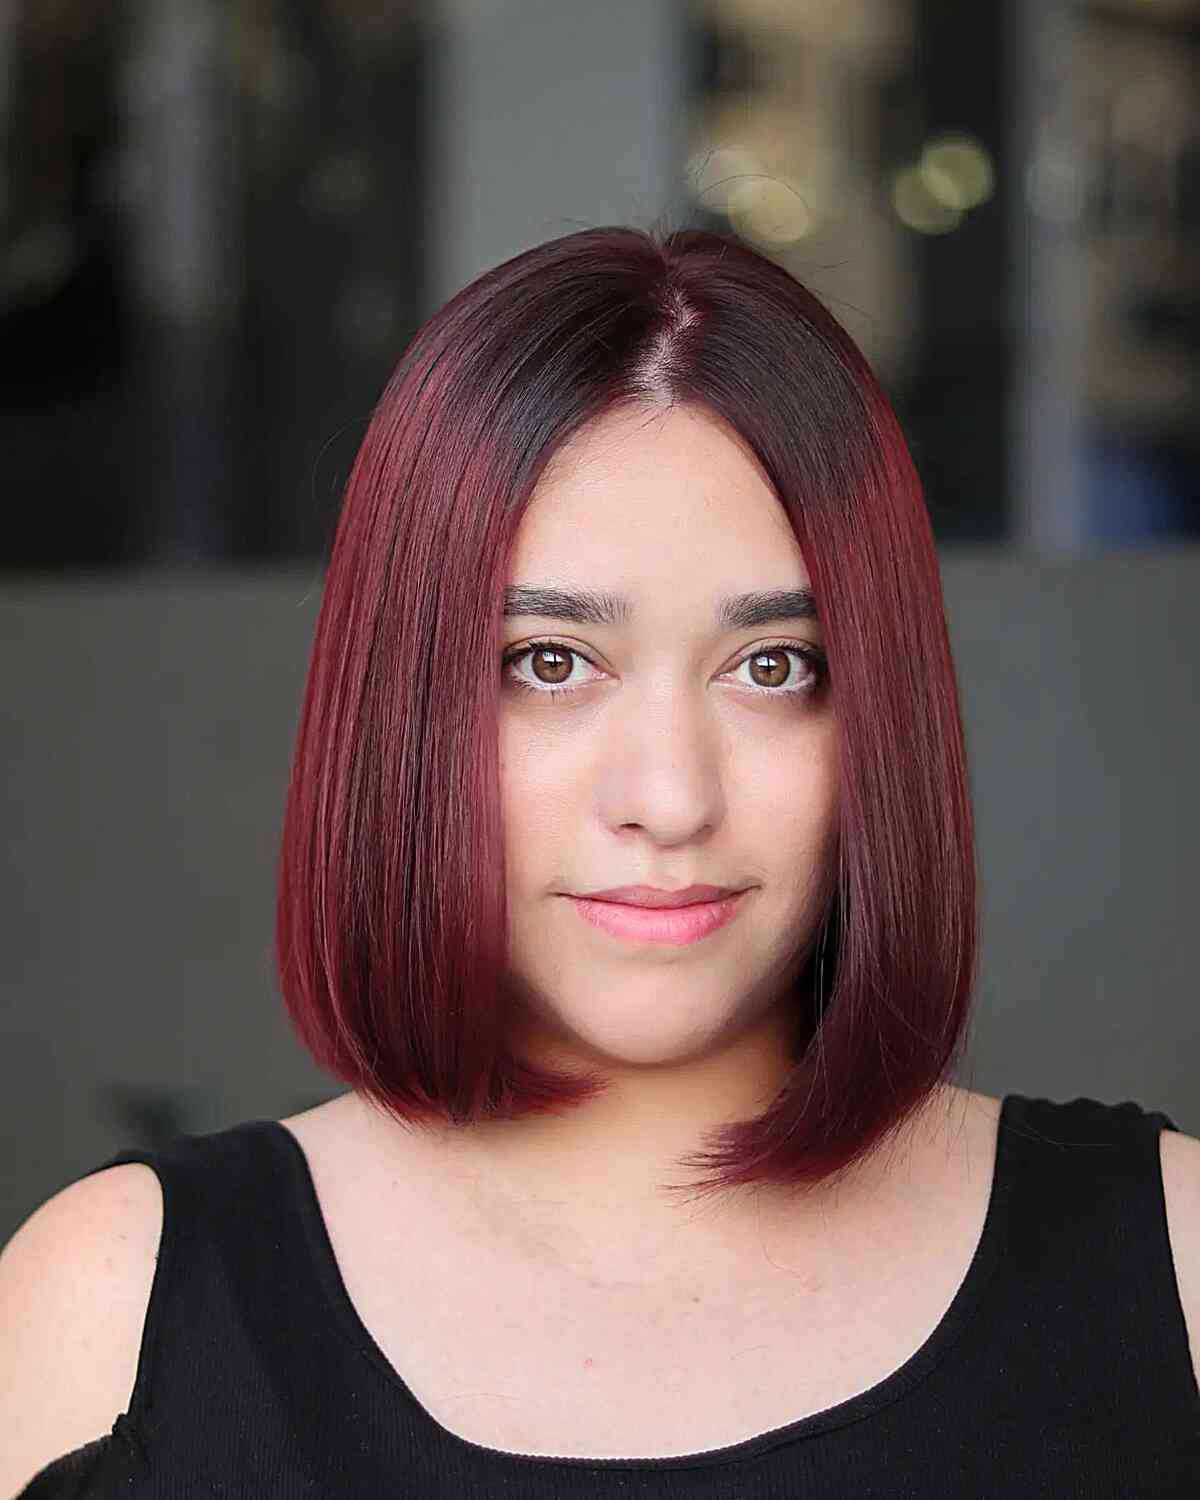 29 Balayage Straight Hair Color Ideas You Have to See in 2023